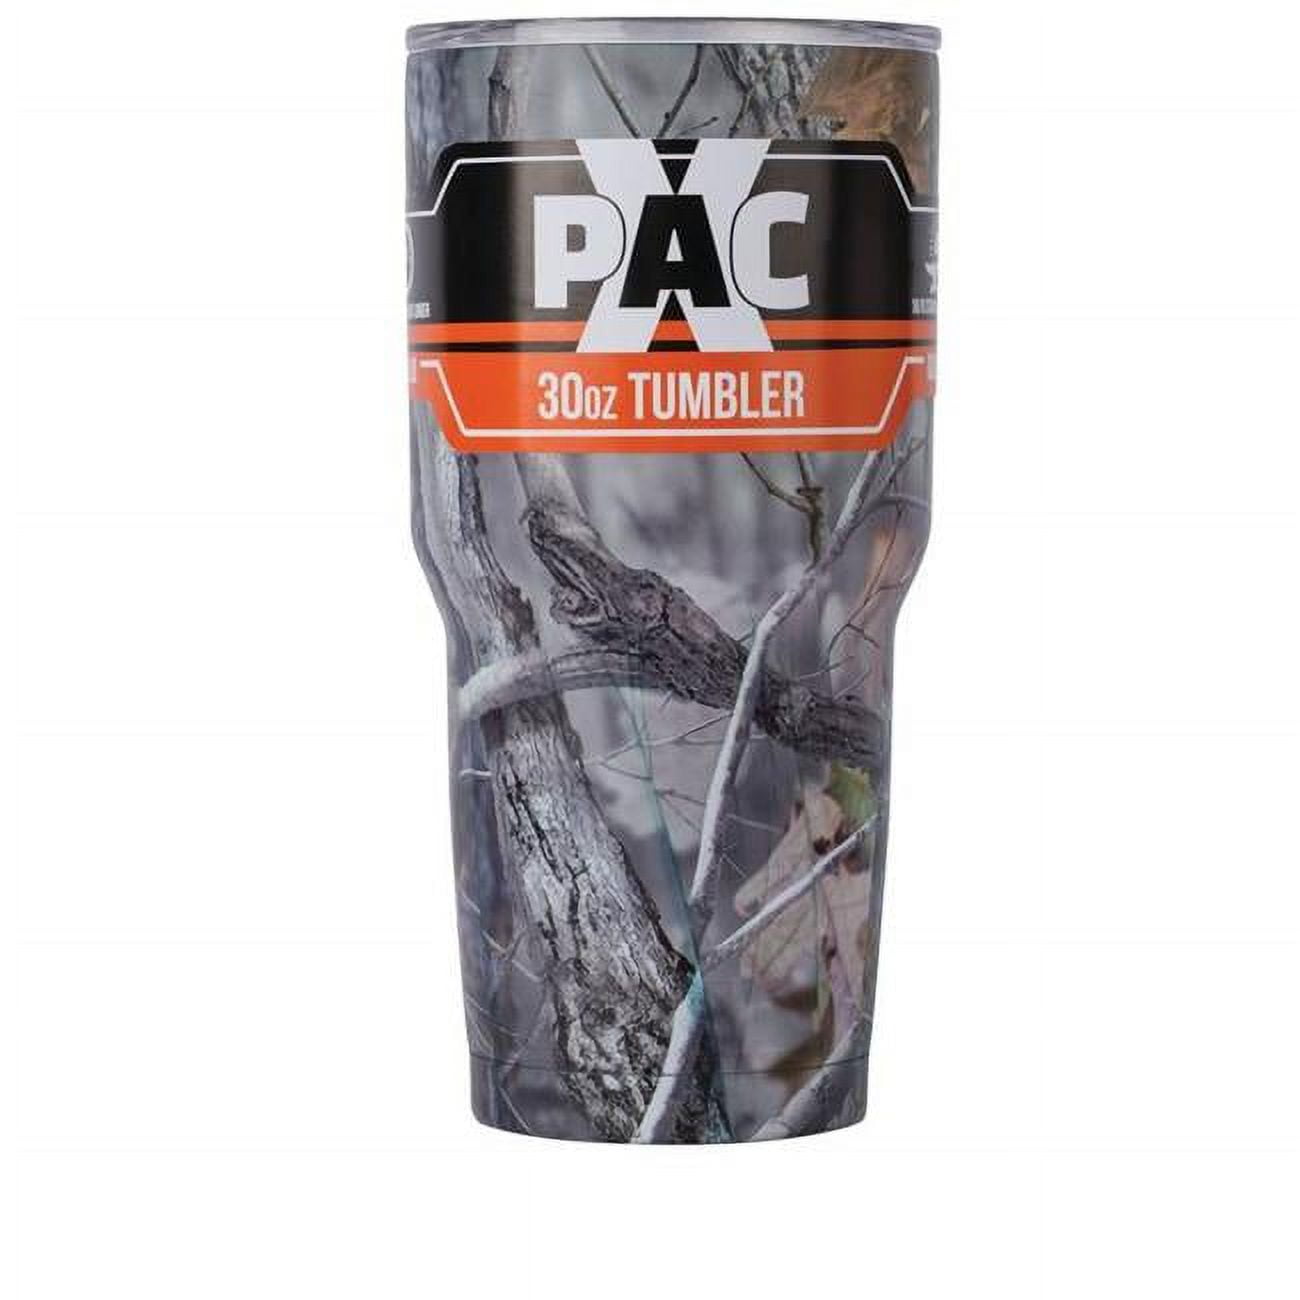 XPAC Camo Tumbler - Double Wall Vacuum Insulated Stainless Steel Tumbler -  Clear Flip Top Lid & Sati…See more XPAC Camo Tumbler - Double Wall Vacuum